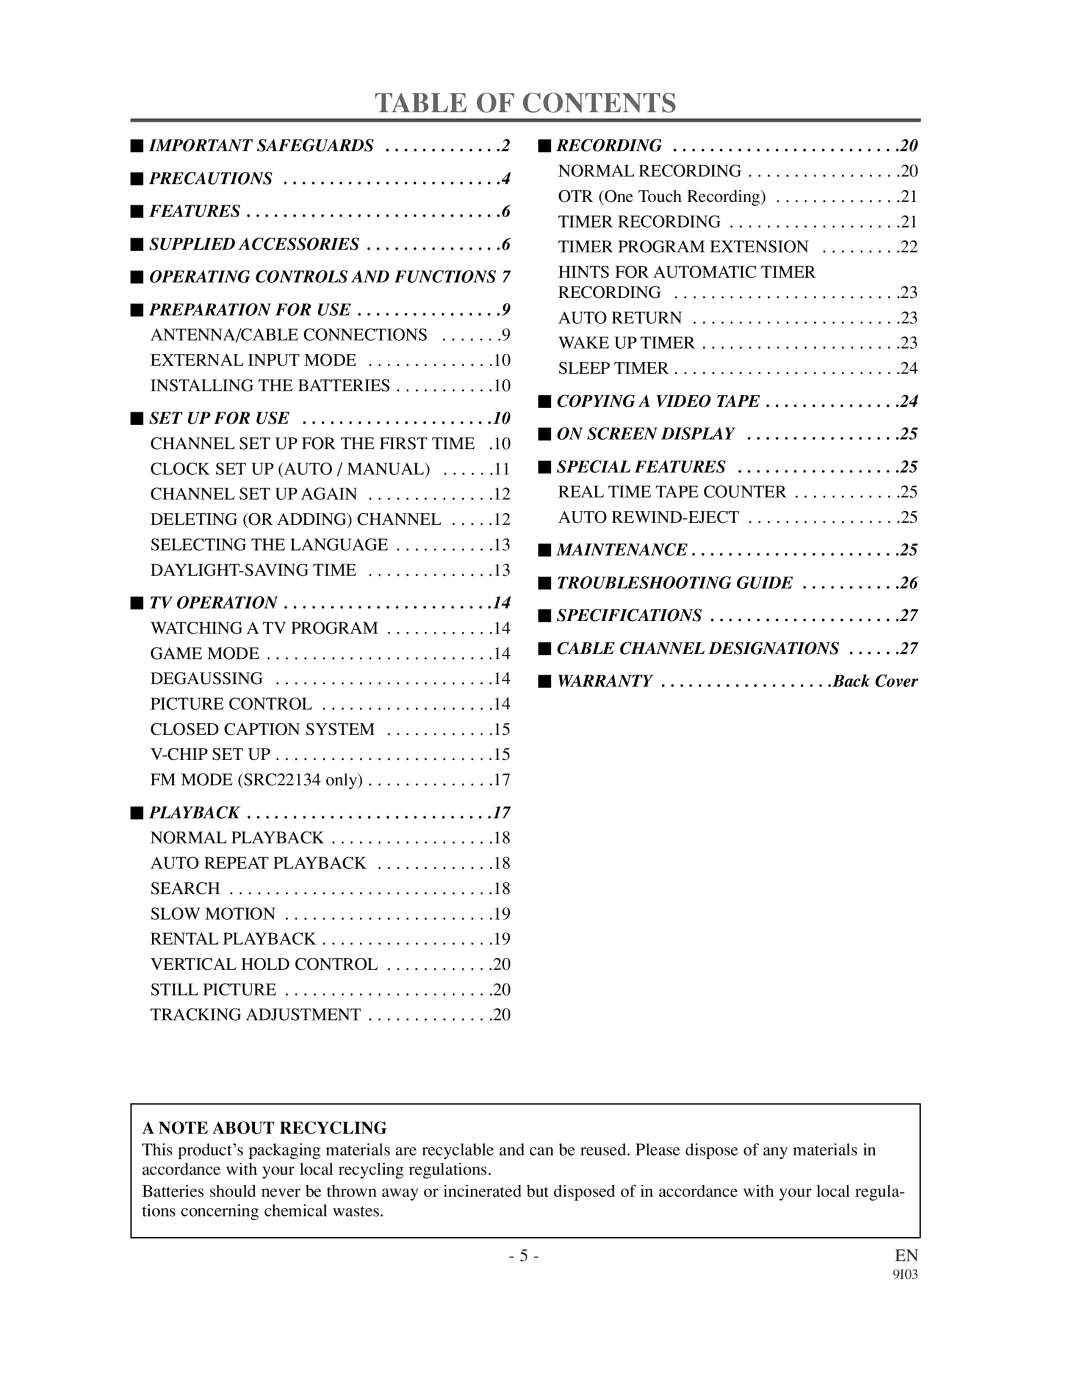 Sylvania SRT22134, SRT22194 owner manual Table of Contents 